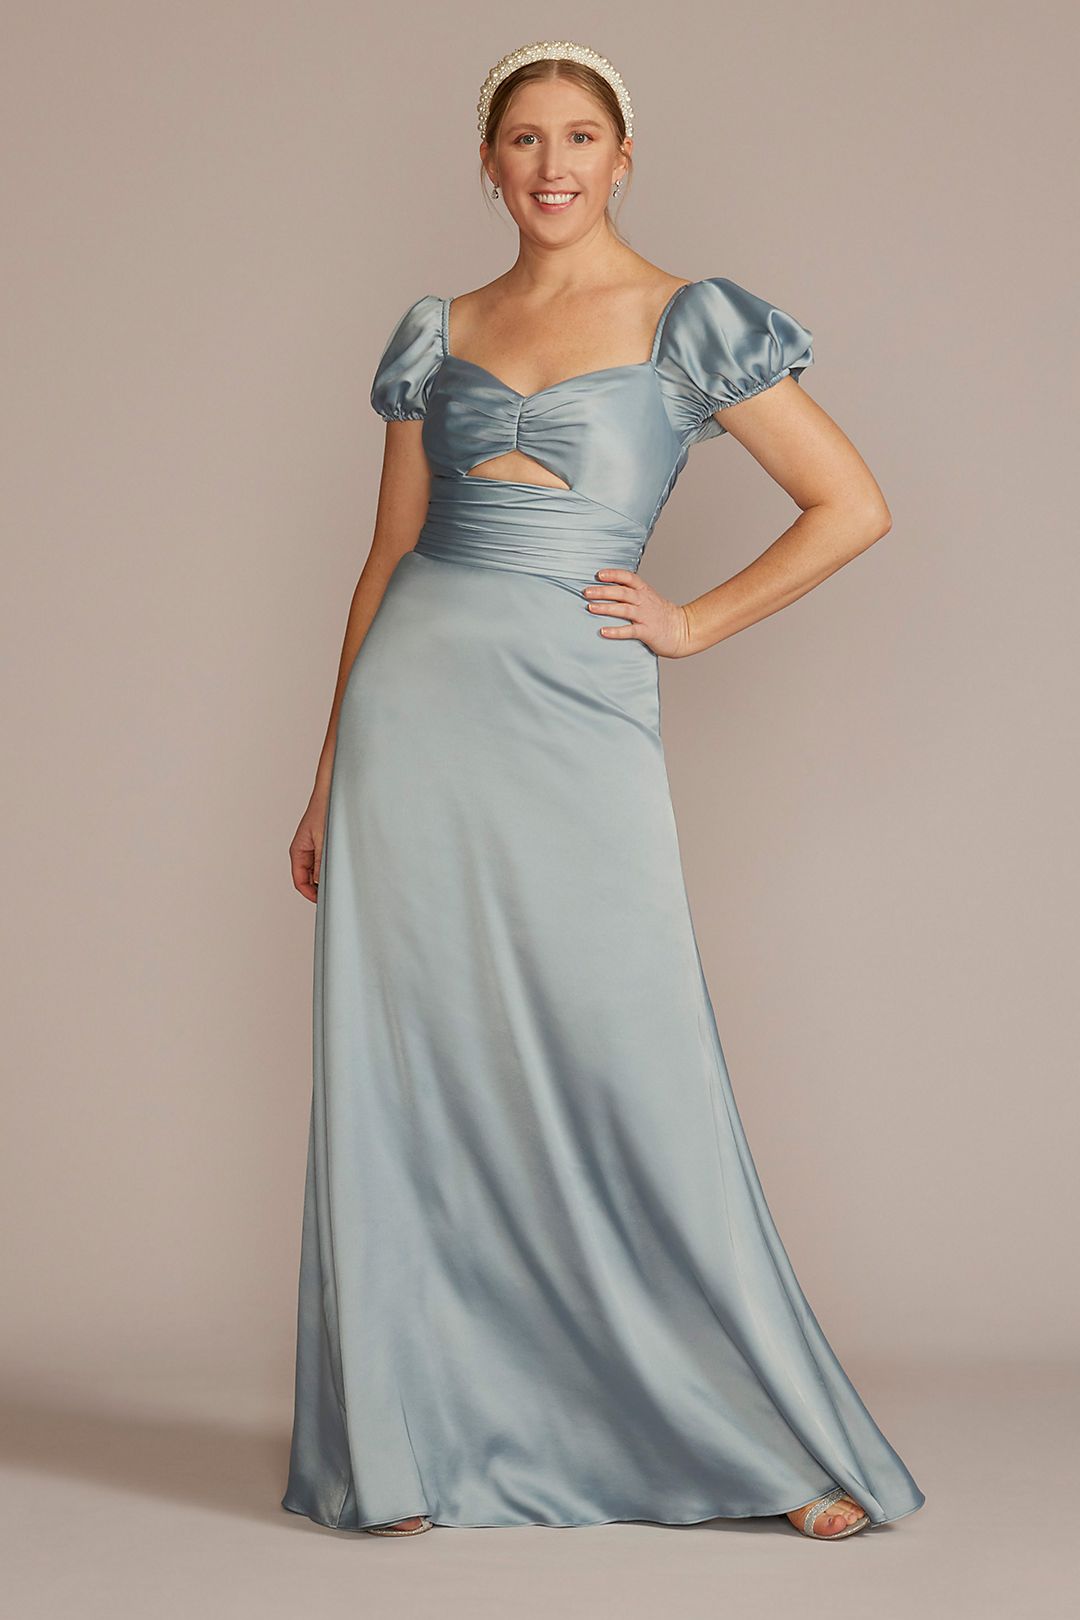 Puff Sleeve Satin Gown is on sale for $14.95